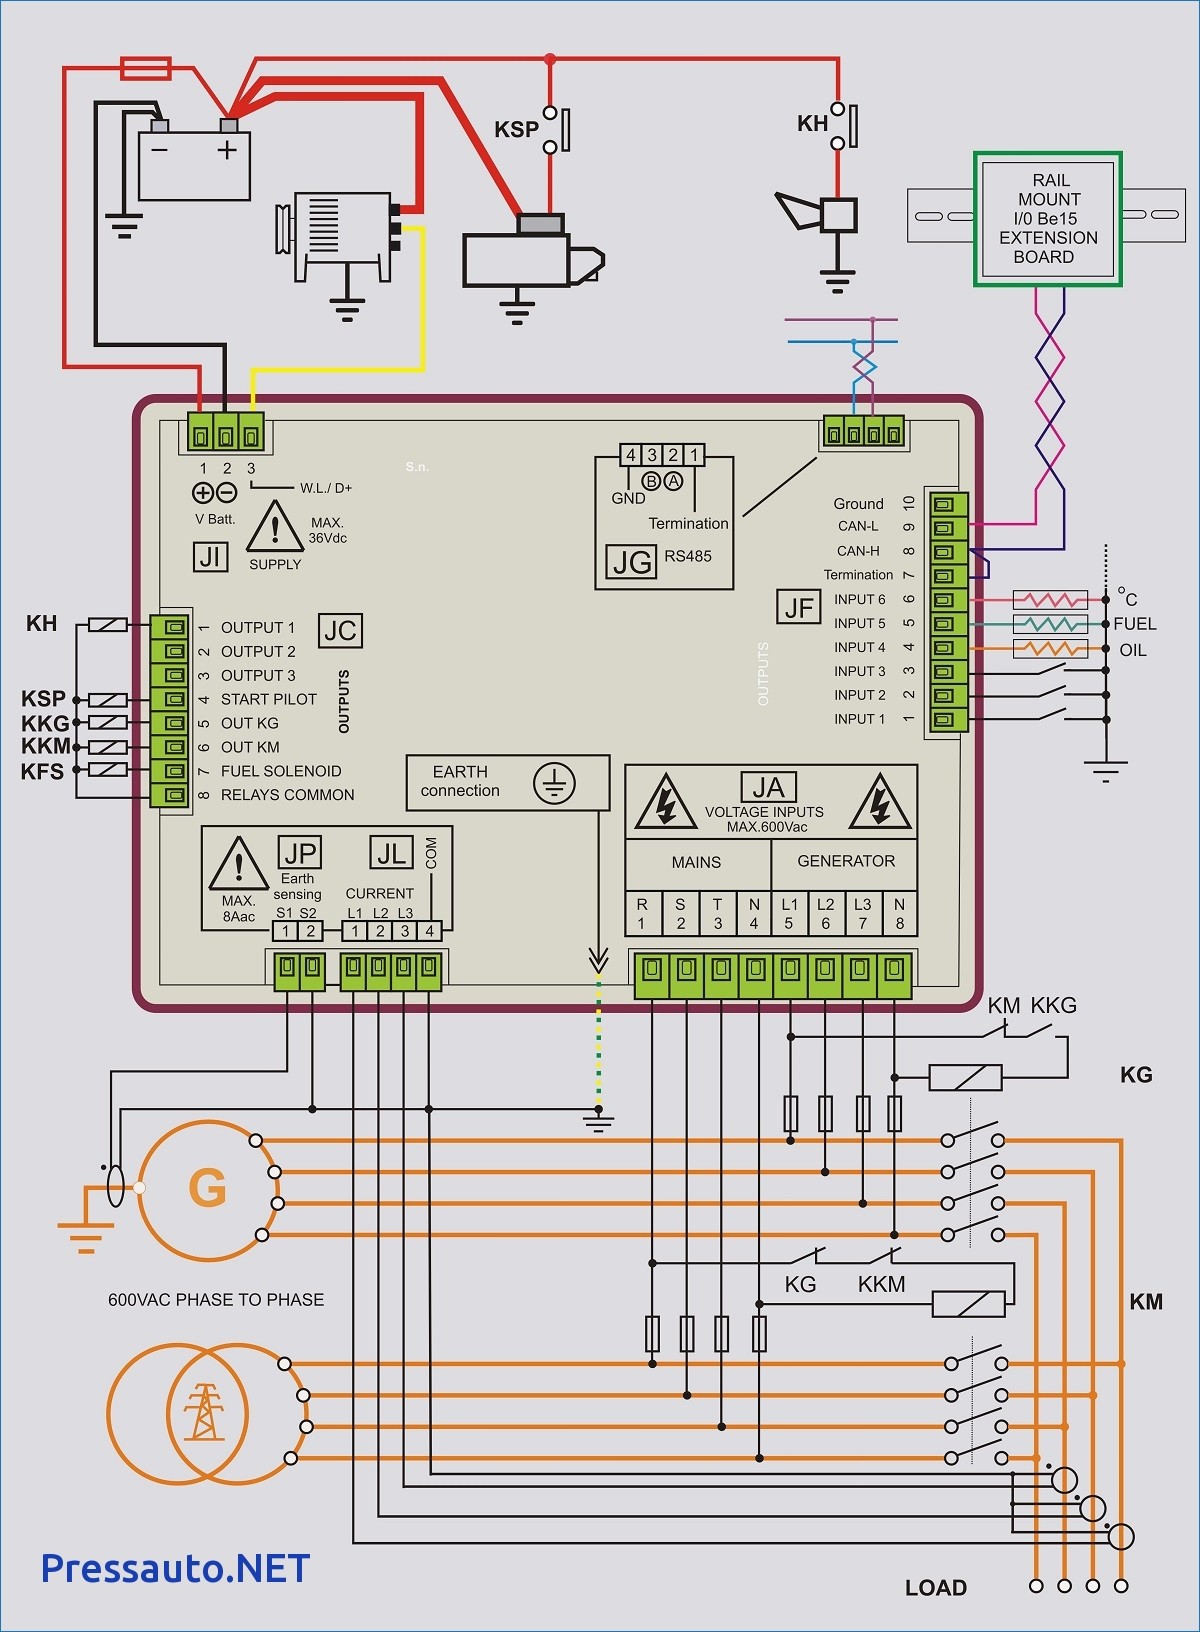 Generac Automatic Transfer Switch Wiring Diagram Generac Automatic Transfer Switch Wiring Diagram Simple Wiring